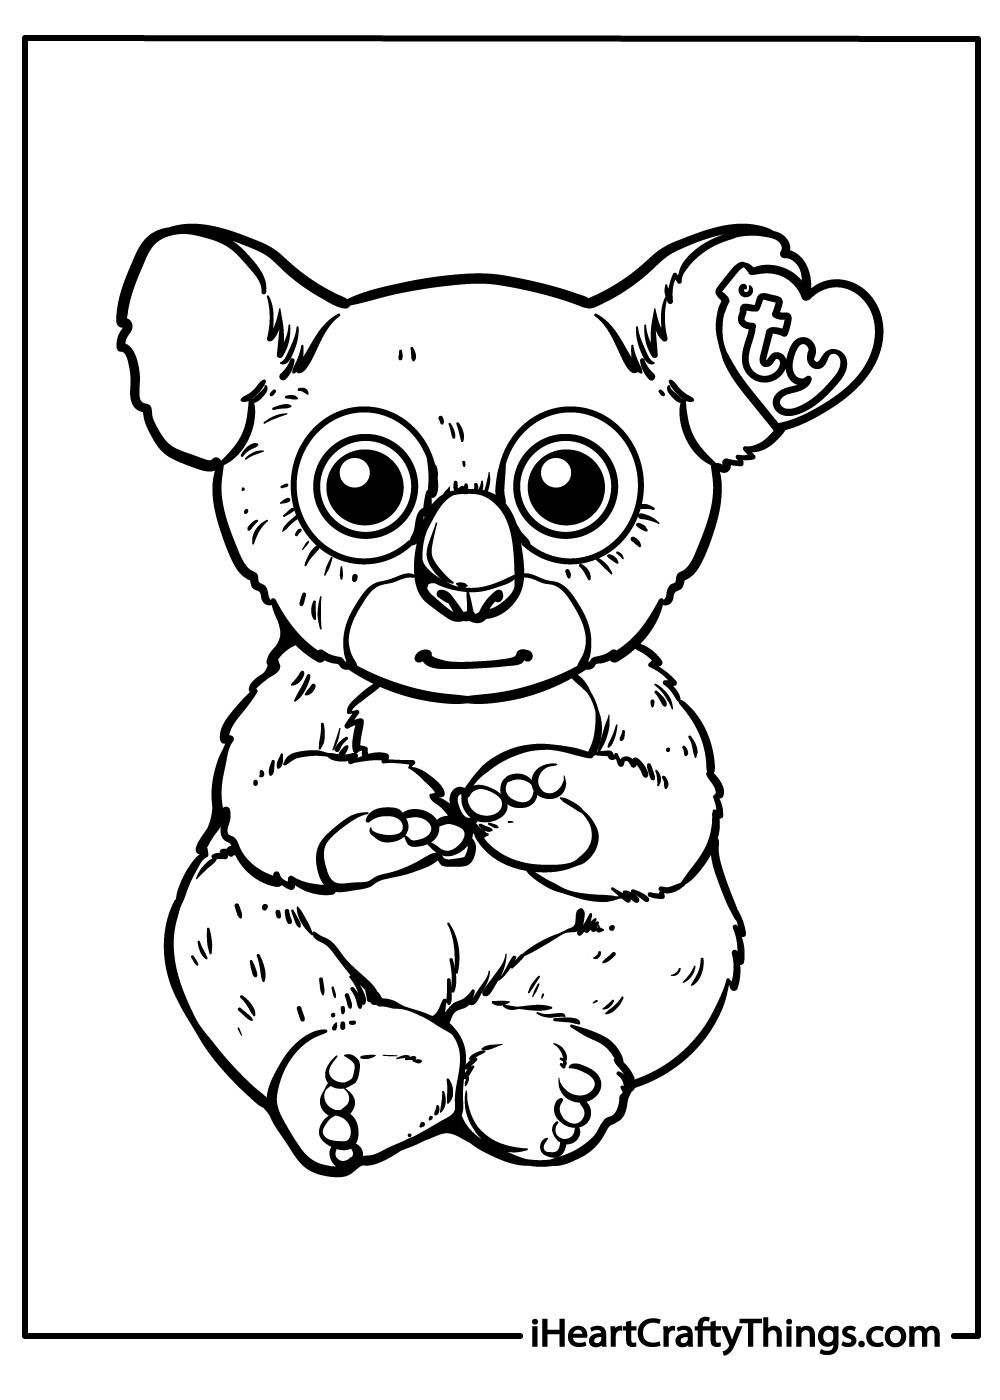 New Beanie Boos Coloring Pages for Kids